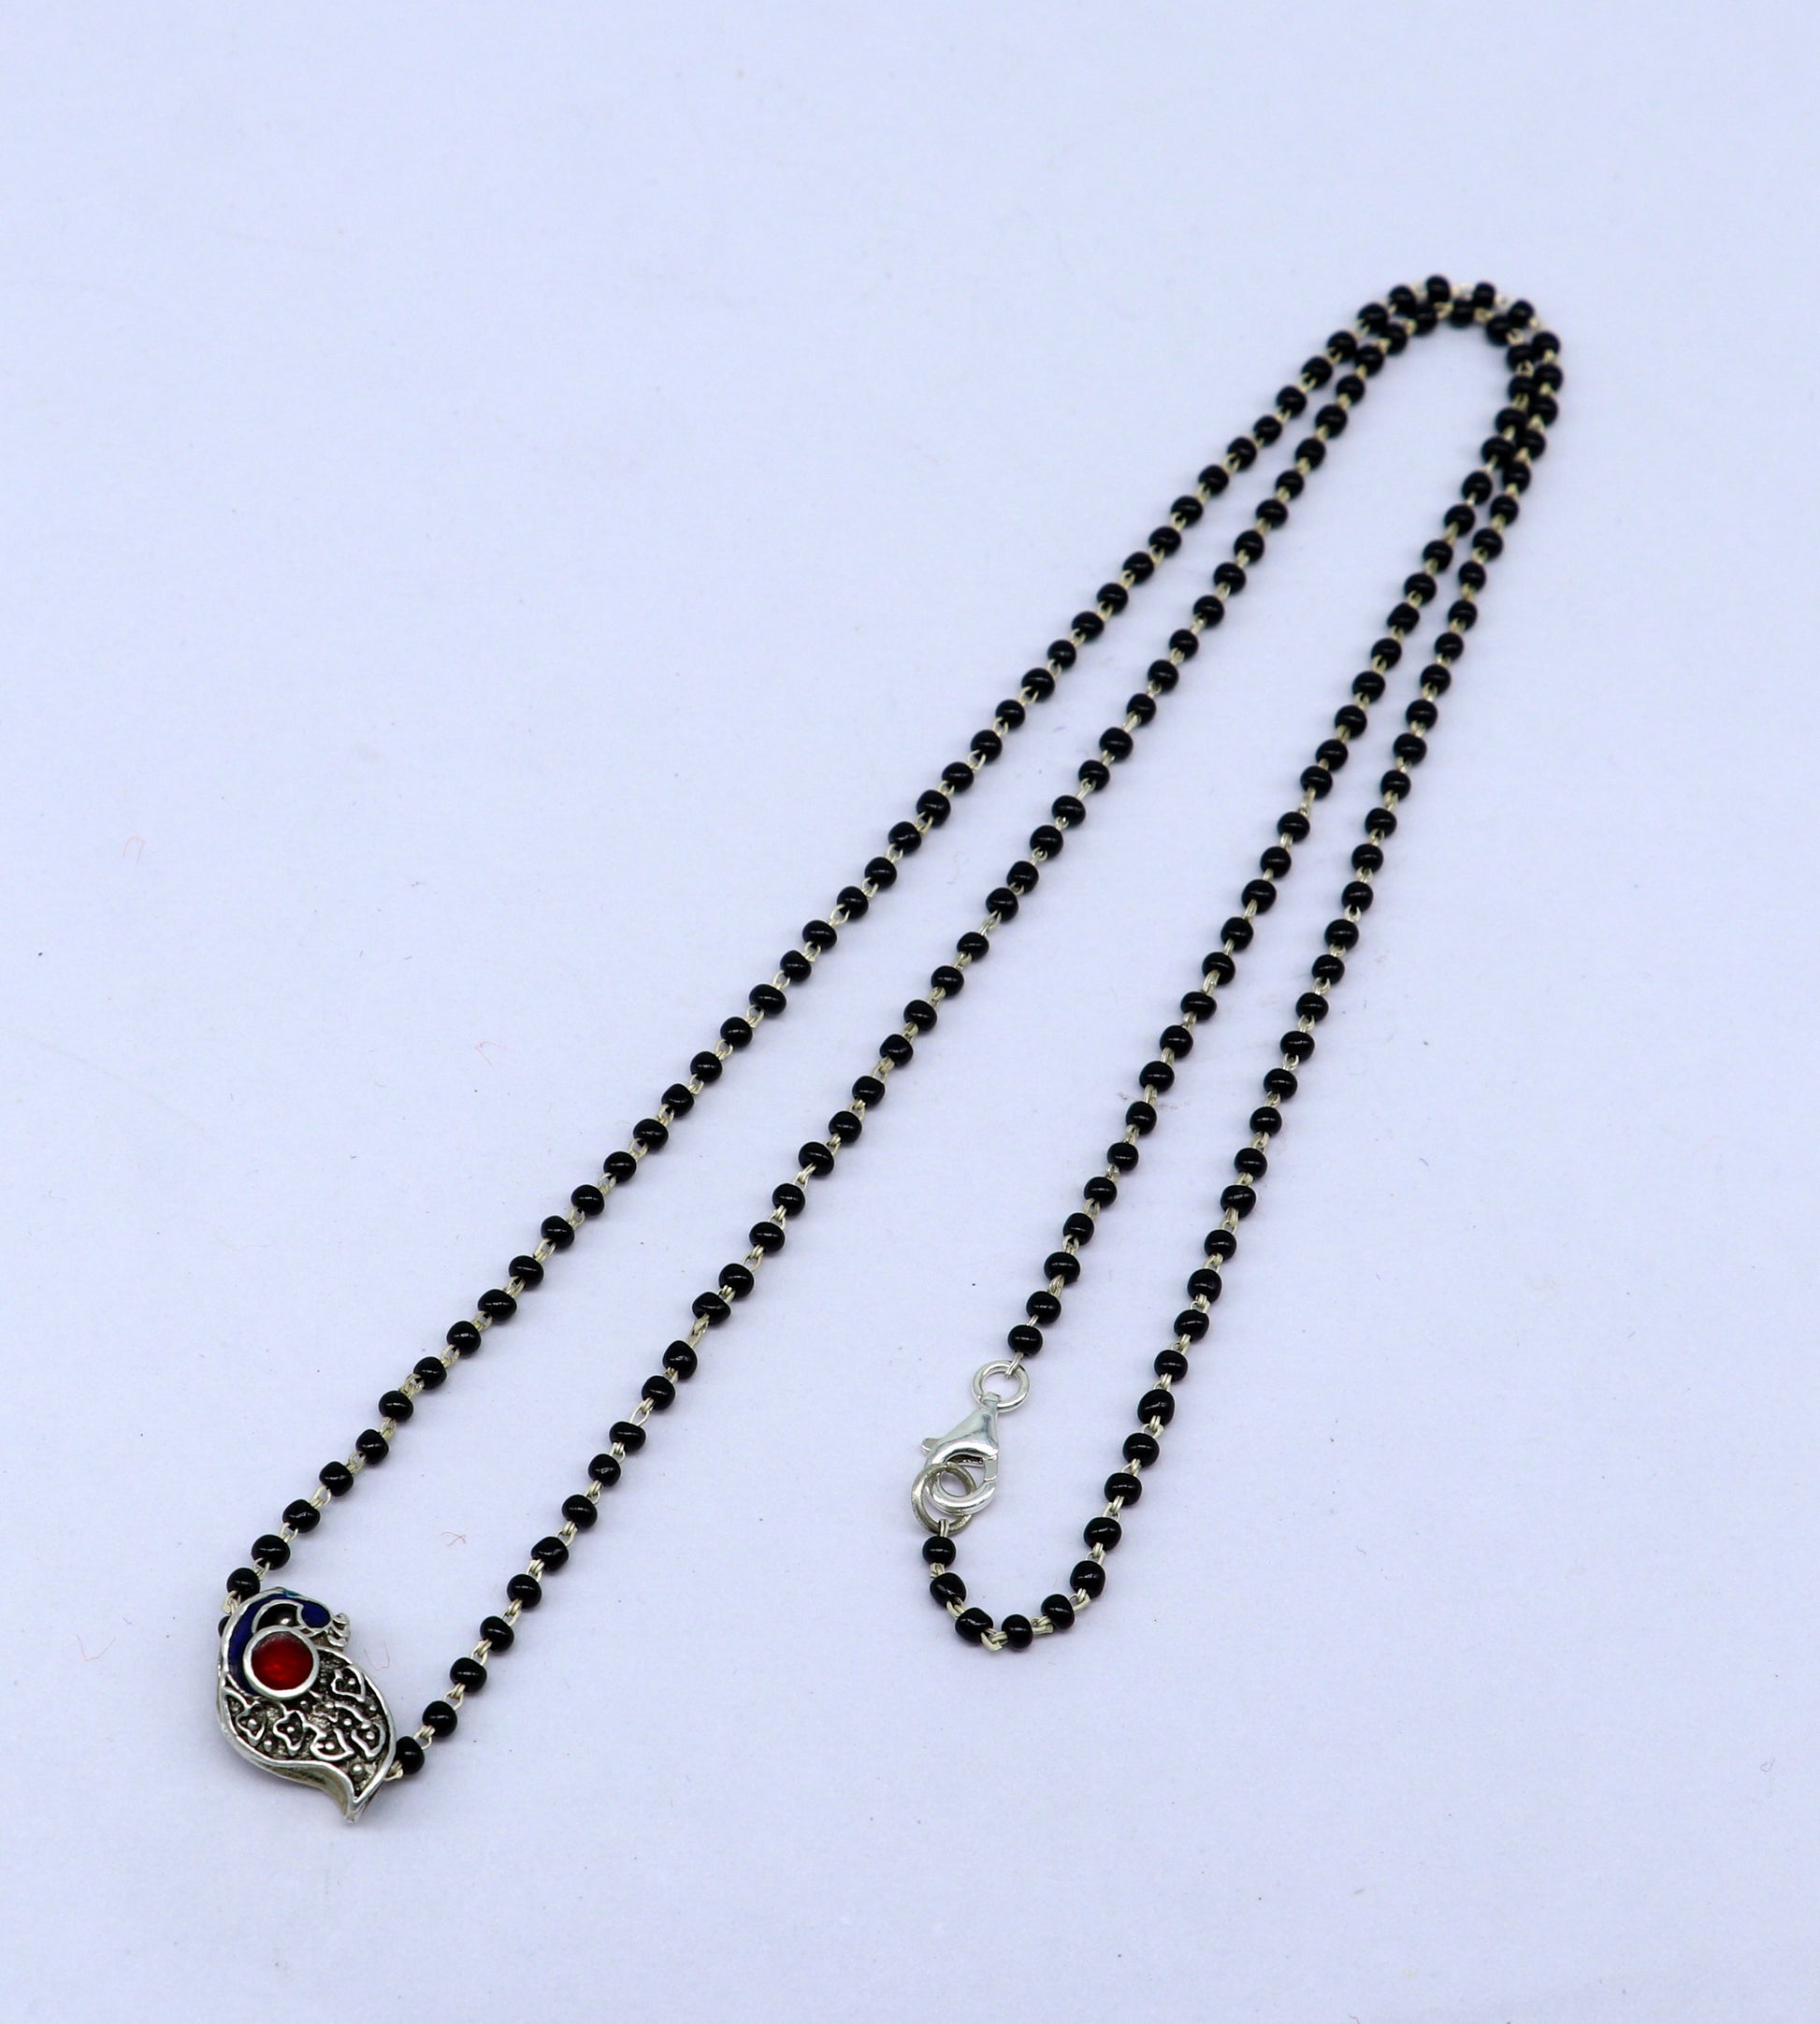 Pure 925 sterling silver black beads chain necklace, gorgeous peacock design pendant, traditional style brides mangalsutra necklace set171 - TRIBAL ORNAMENTS